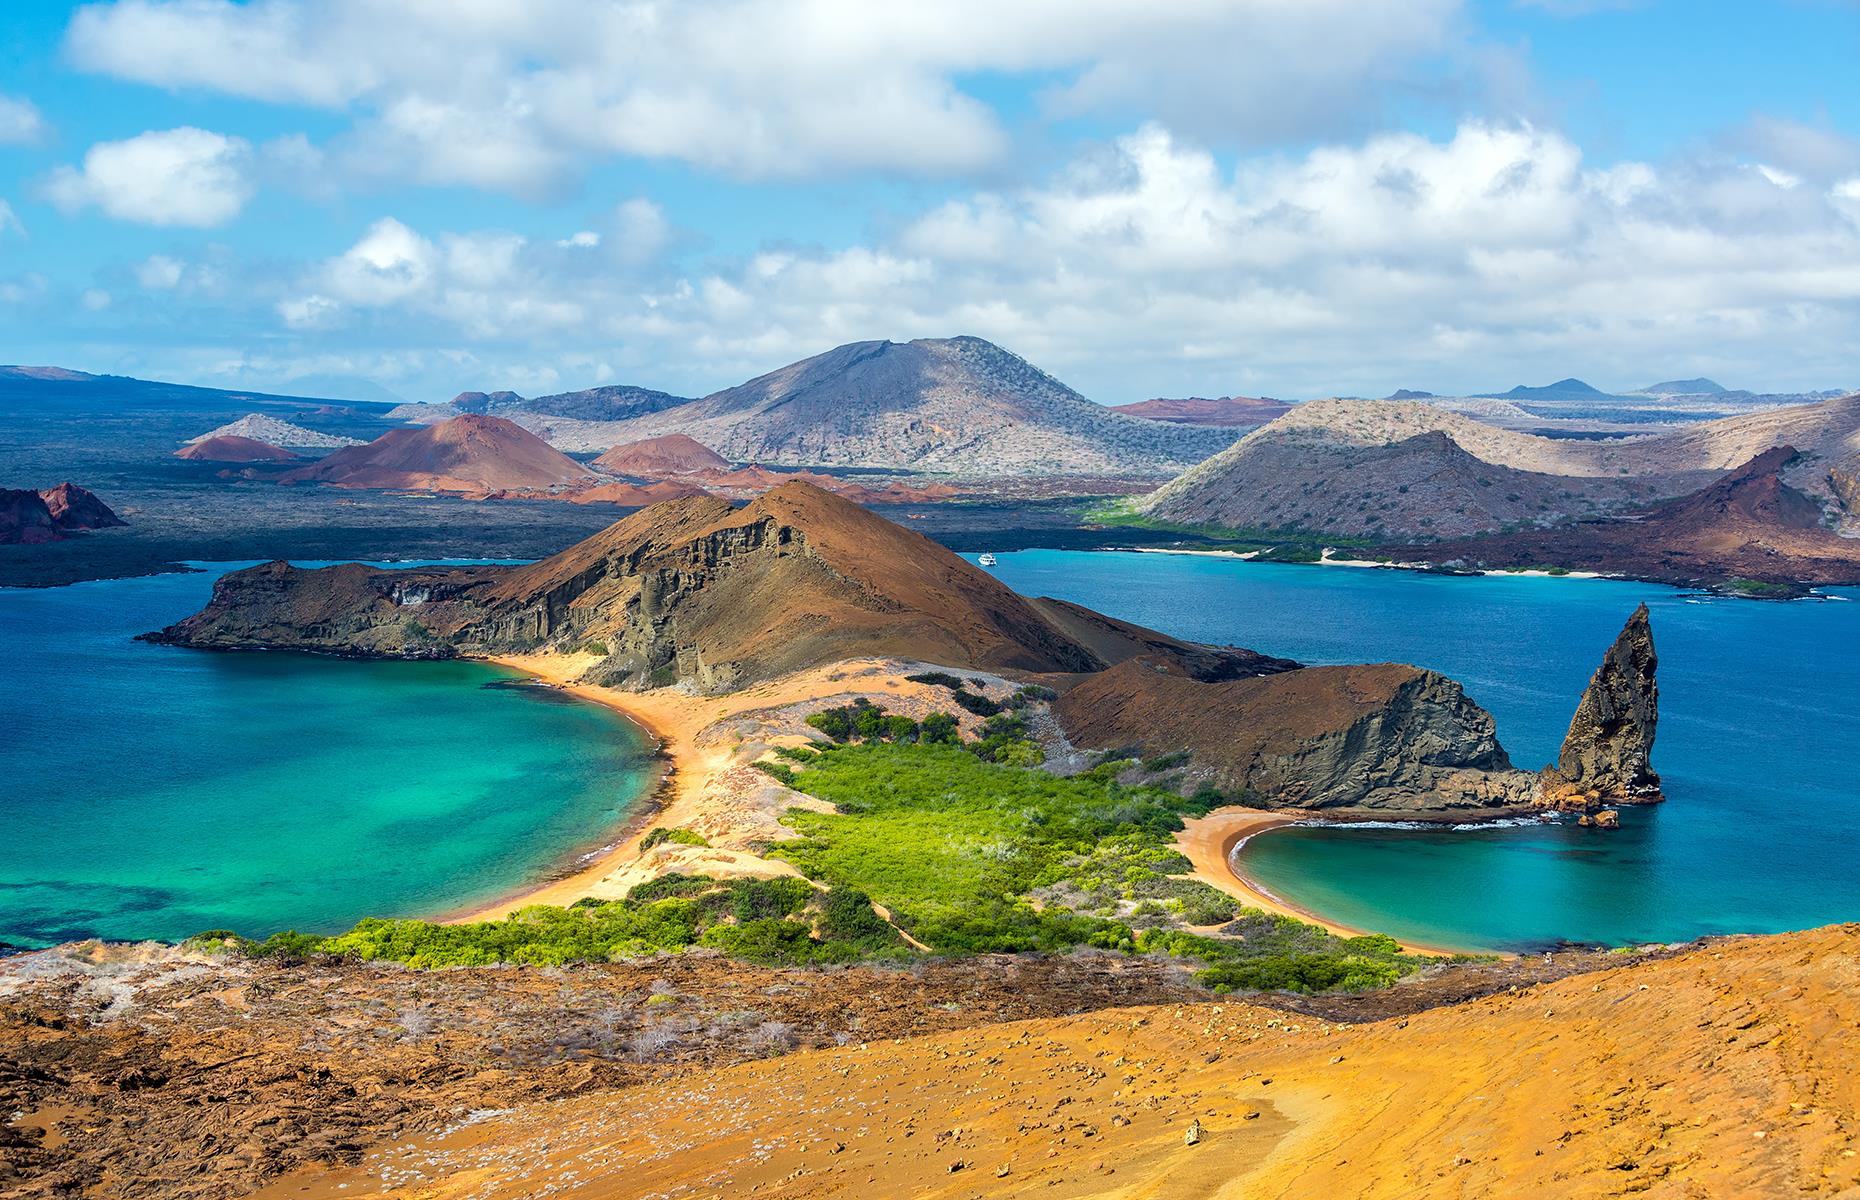 <p>From the world's largest tortoises to colorful crabs and a huge variety of birds, the Galápagos are a haven for wildlife. Charles Darwin sailed here on the Beagle and now visitors can explore on an adventure cruise.</p>  <p><a href="https://www.loveexploring.com/galleries/113902/secrets-of-the-worlds-most-special-islands?page=1"><strong>Learn more about these special islands here</strong></a></p>